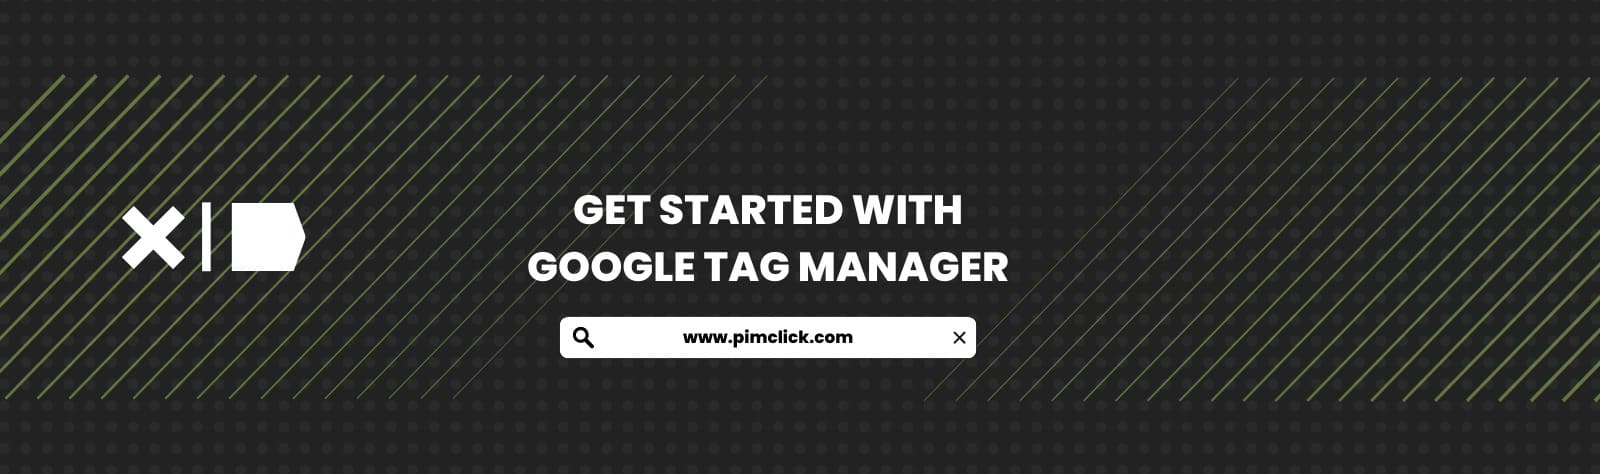 Get Started With Google Tag Manager